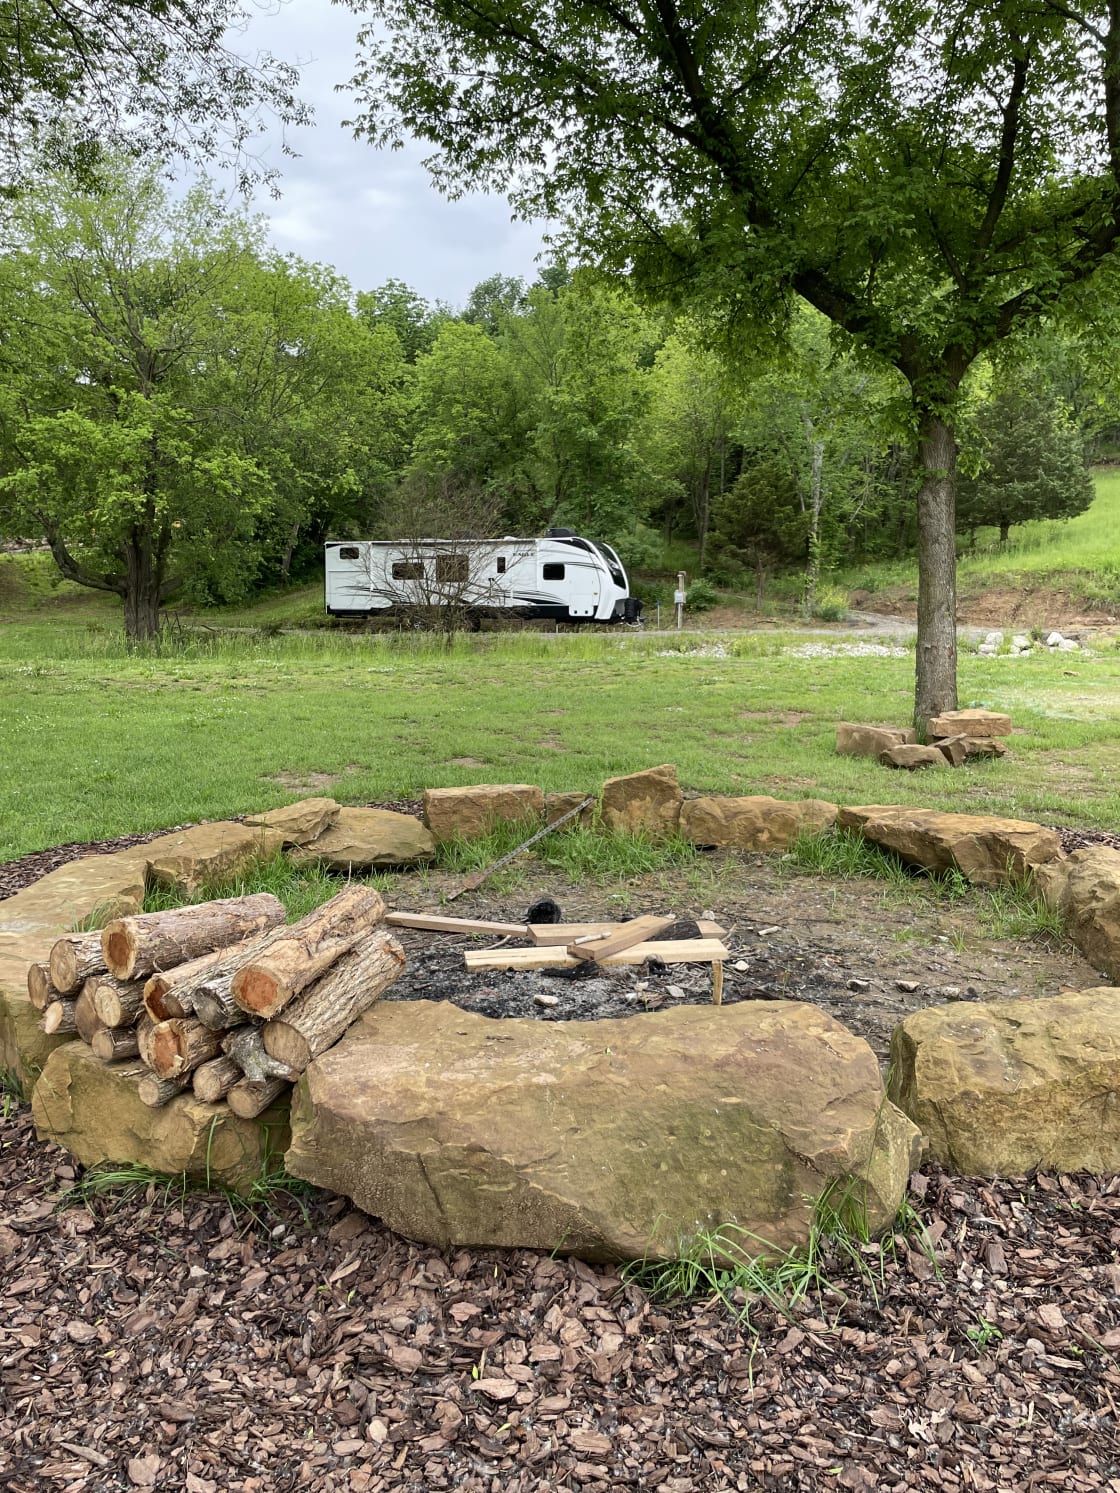 Southern facing view from fire pit. 

(Our personal RV pictured, so you can see how an RV looks in the space.)